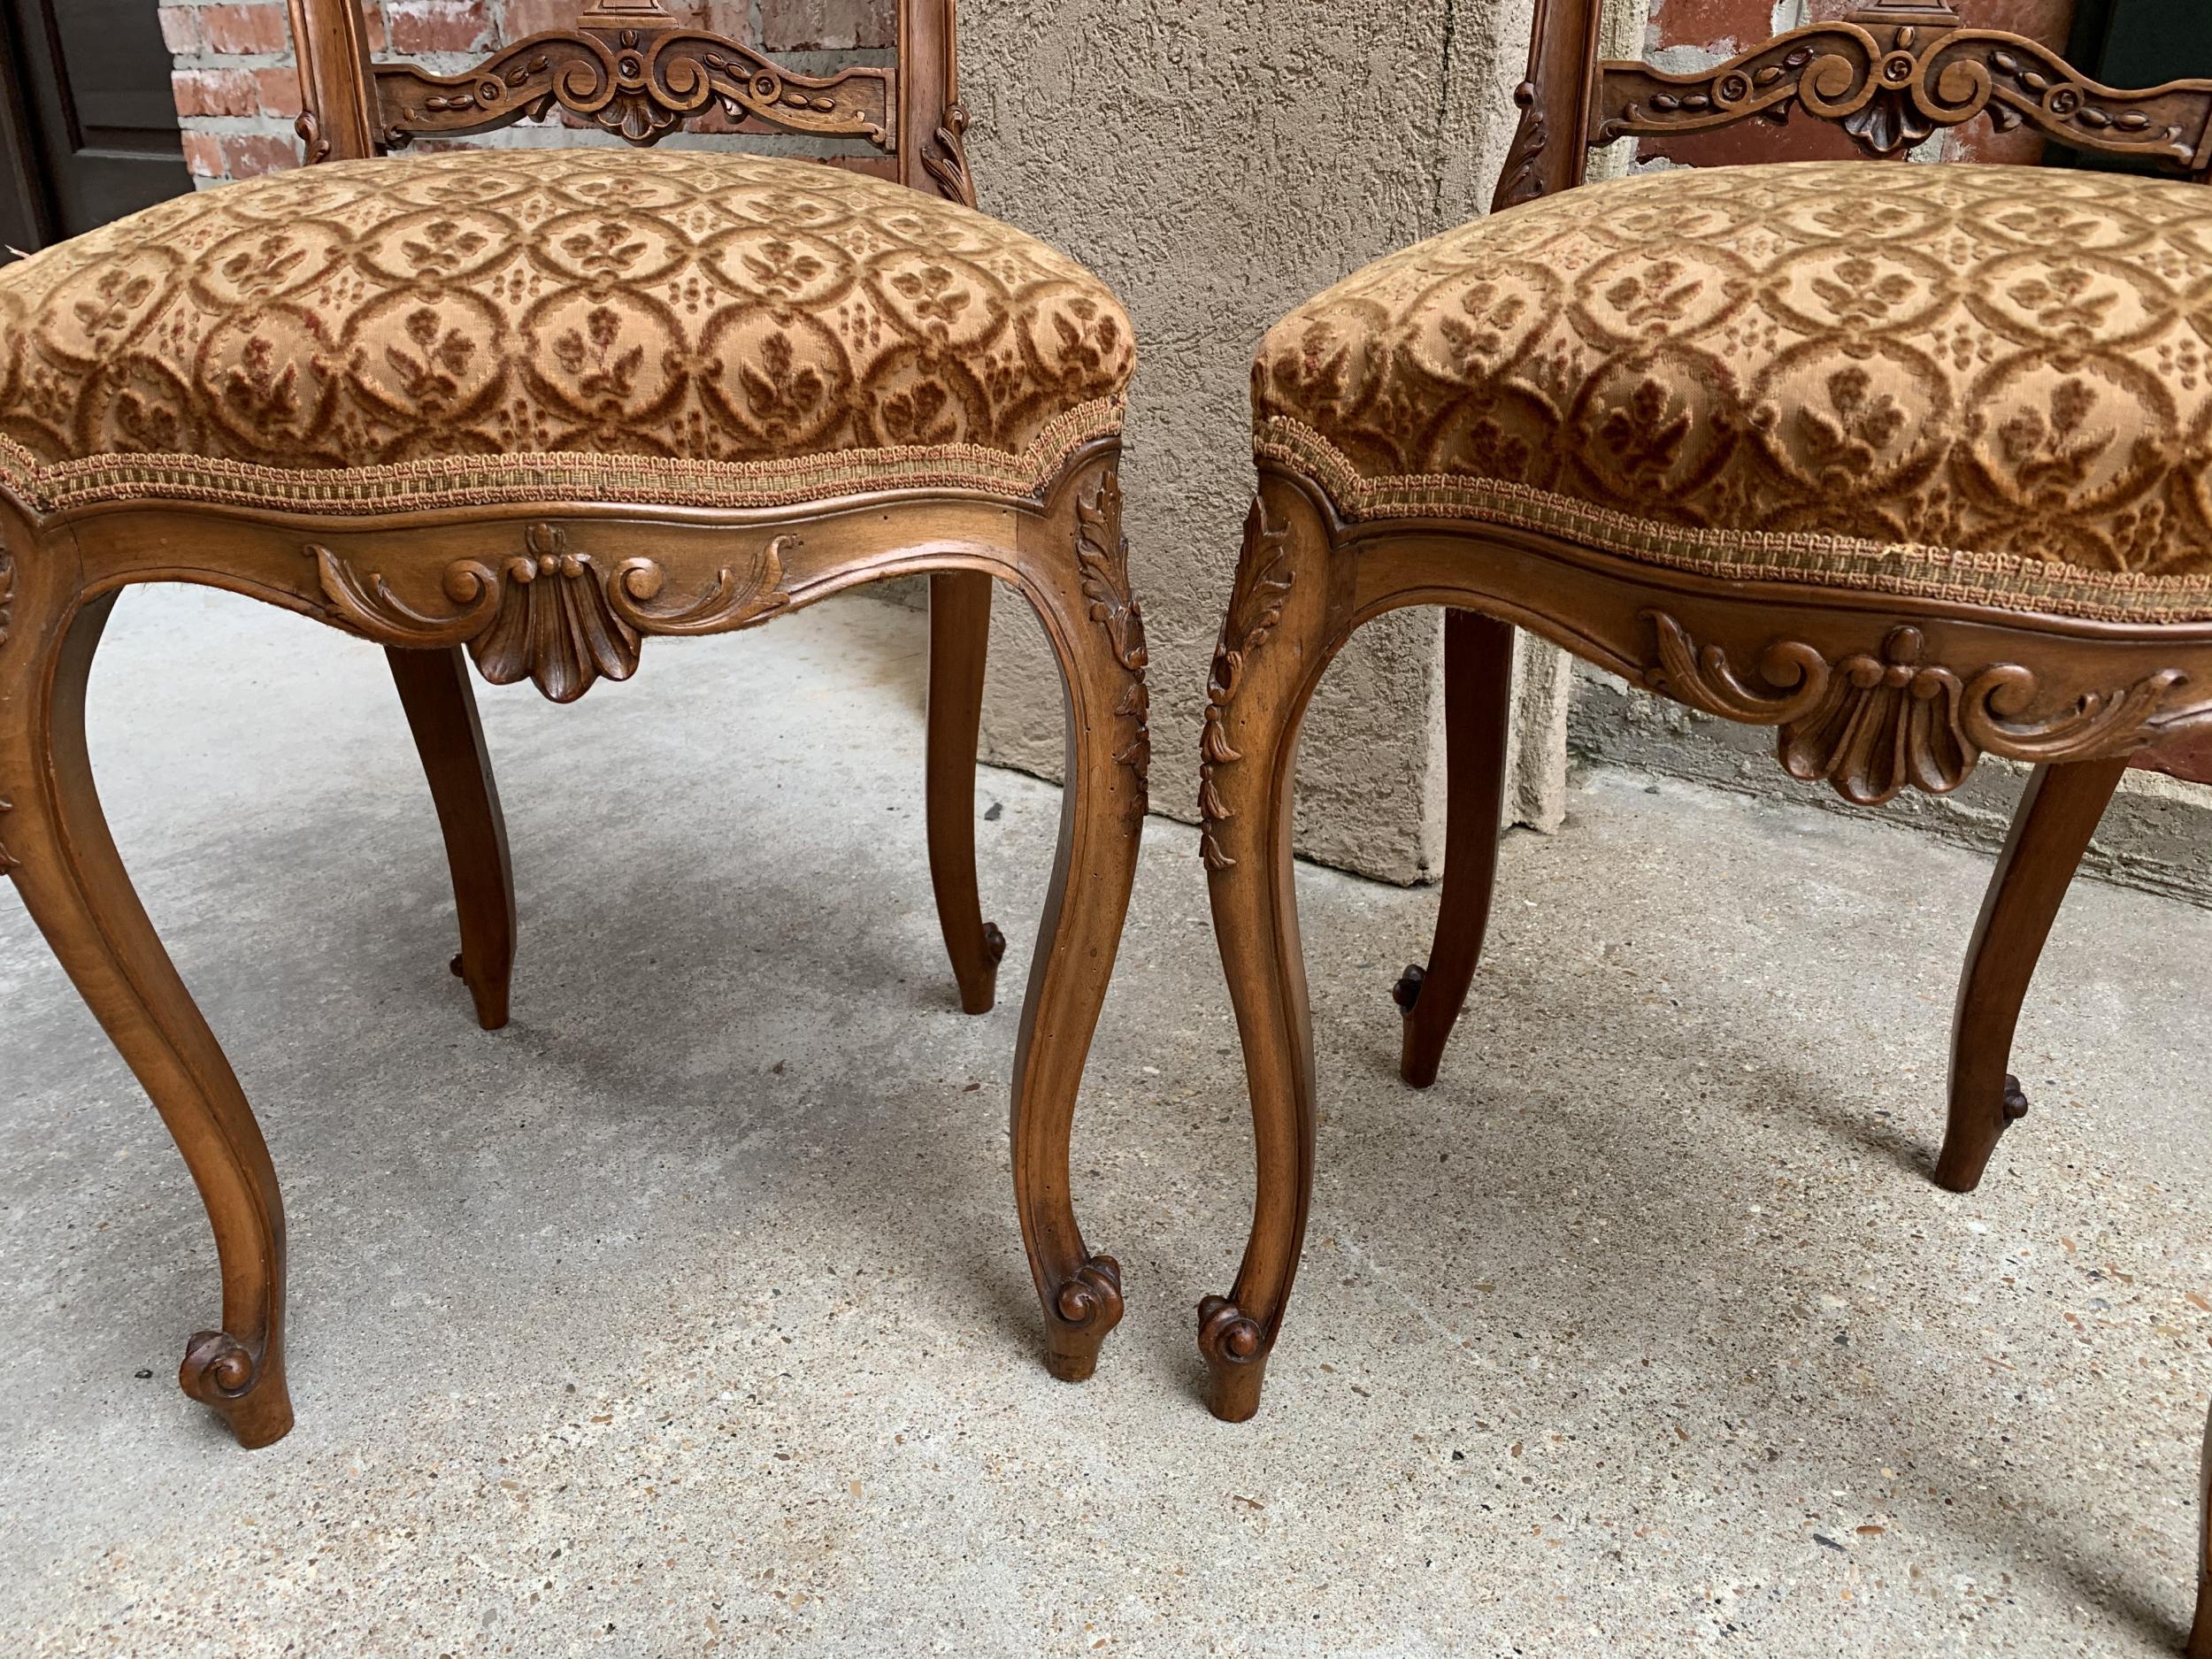 19th century SET of 4 French Petite Chair Carved Walnut Louis XV Tea or Vanity 10